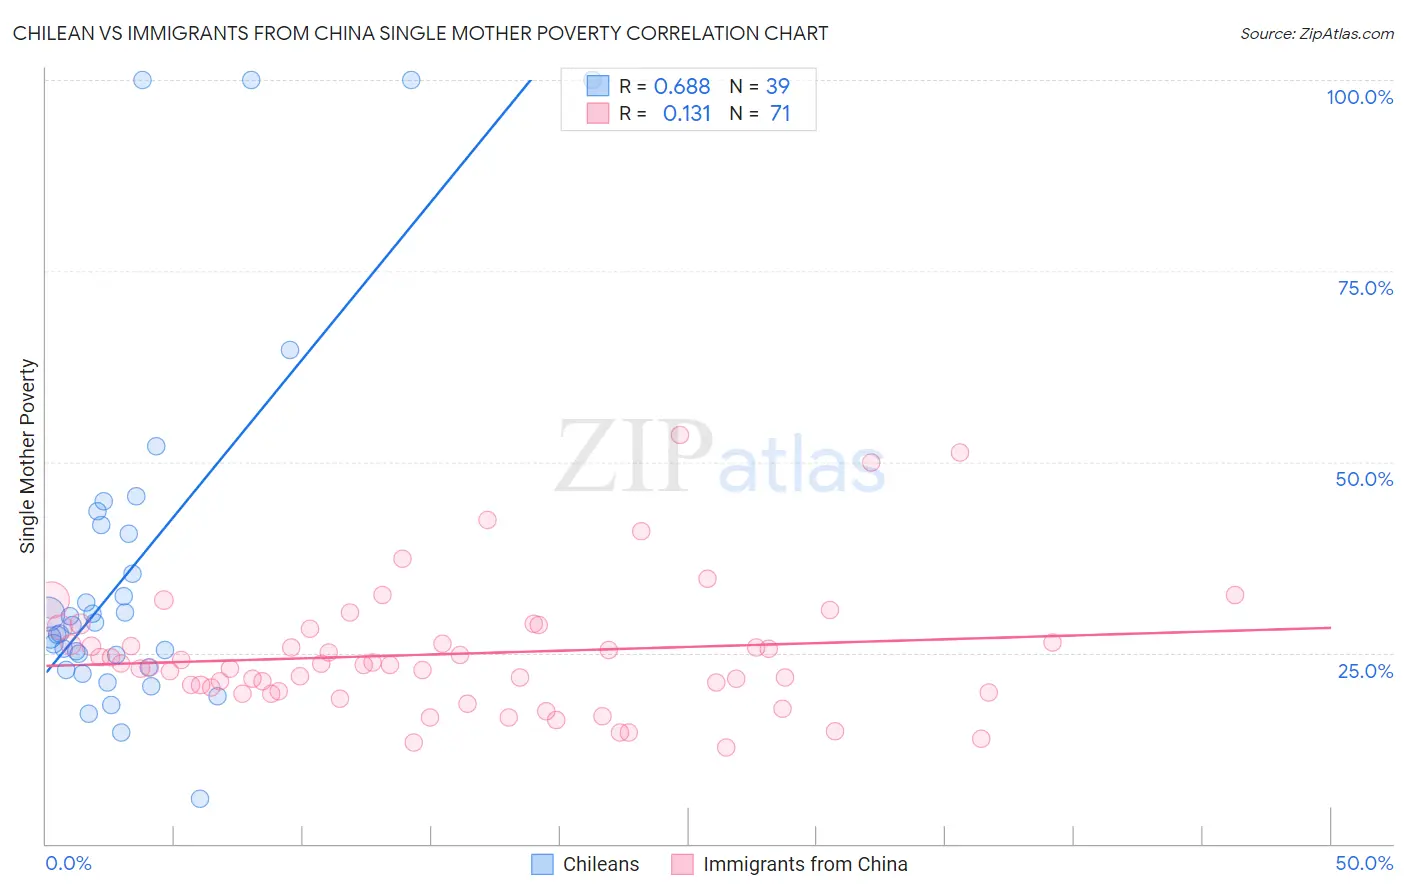 Chilean vs Immigrants from China Single Mother Poverty